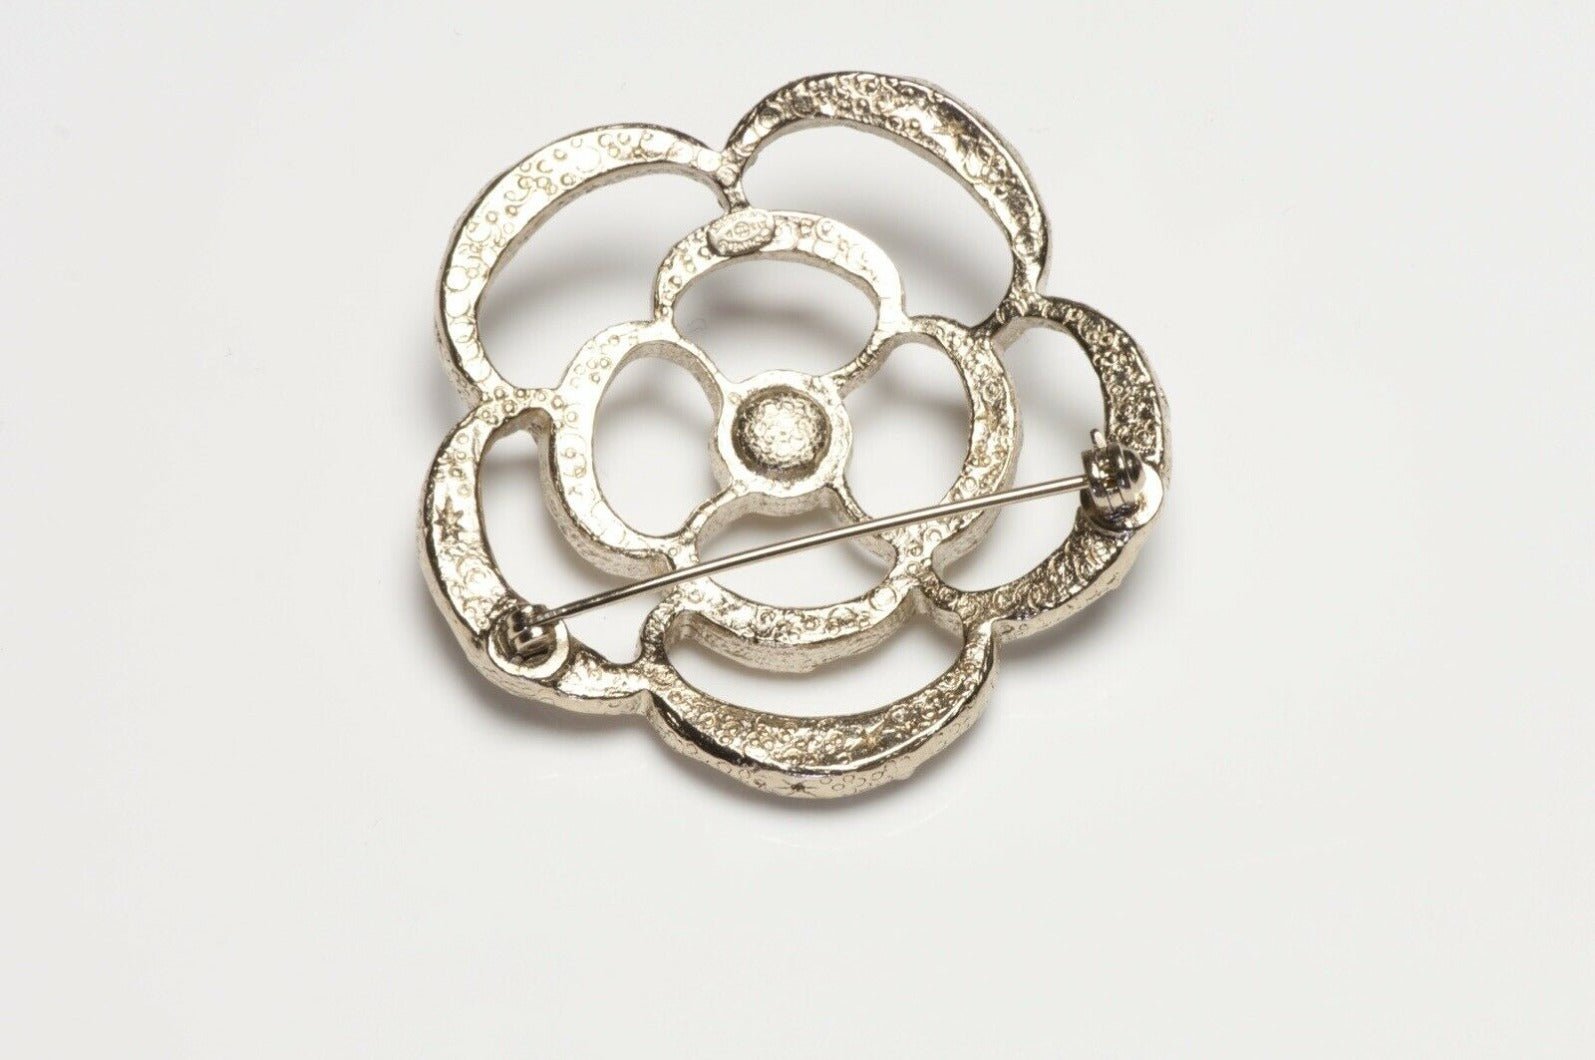 CHANEL Paris Spring 2013 Faux Pearl Camellia Flower Brooch - DSF Antique Jewelry